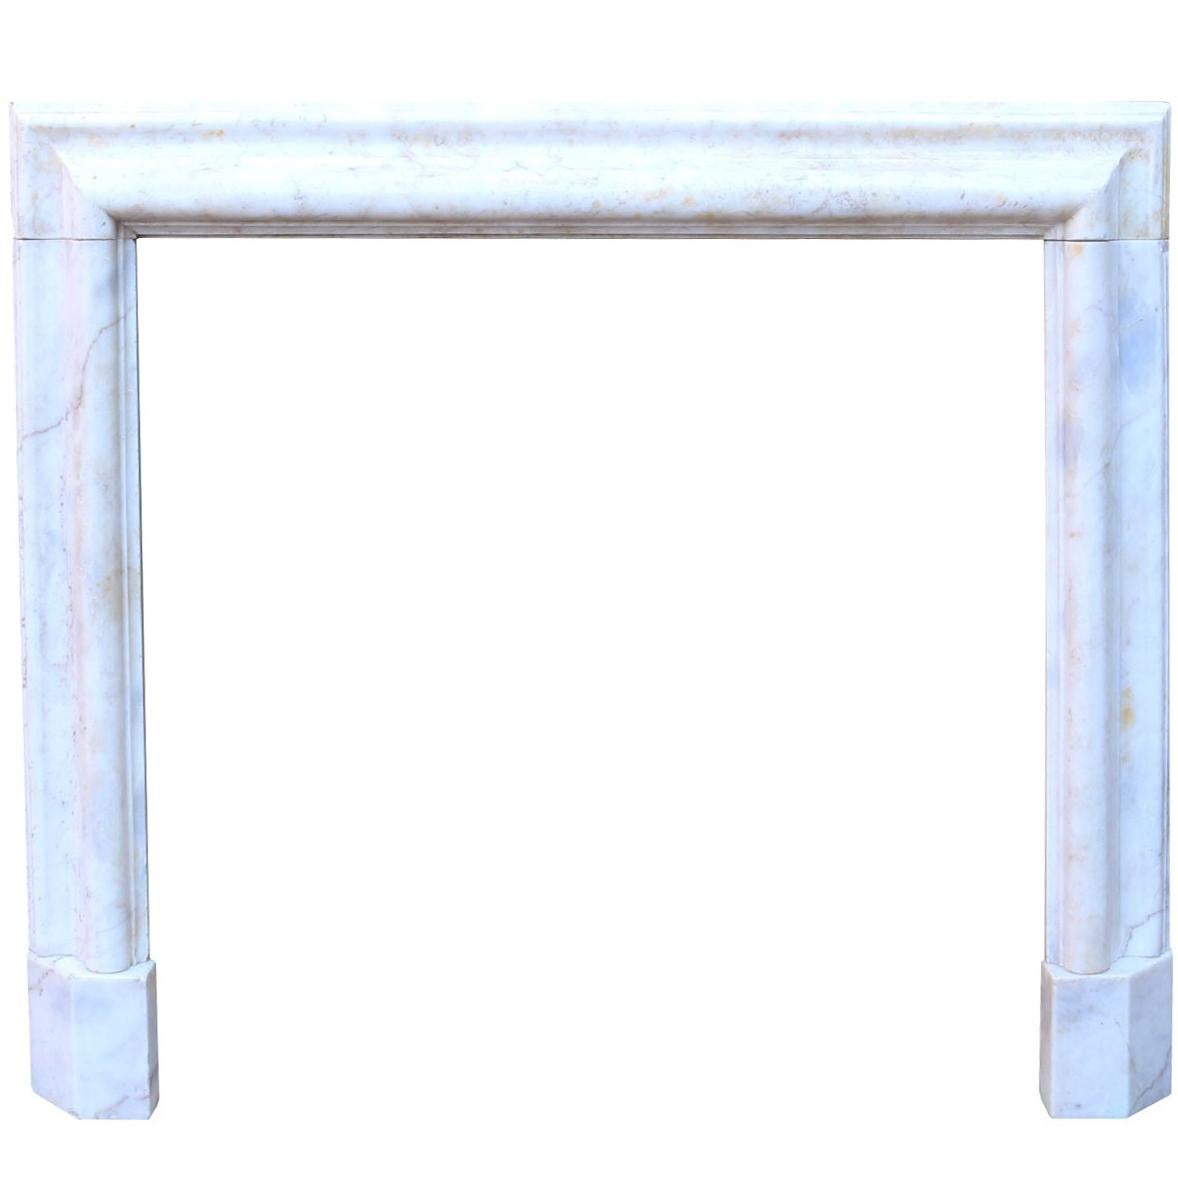  Antique English Bolection Marble Fire Surround